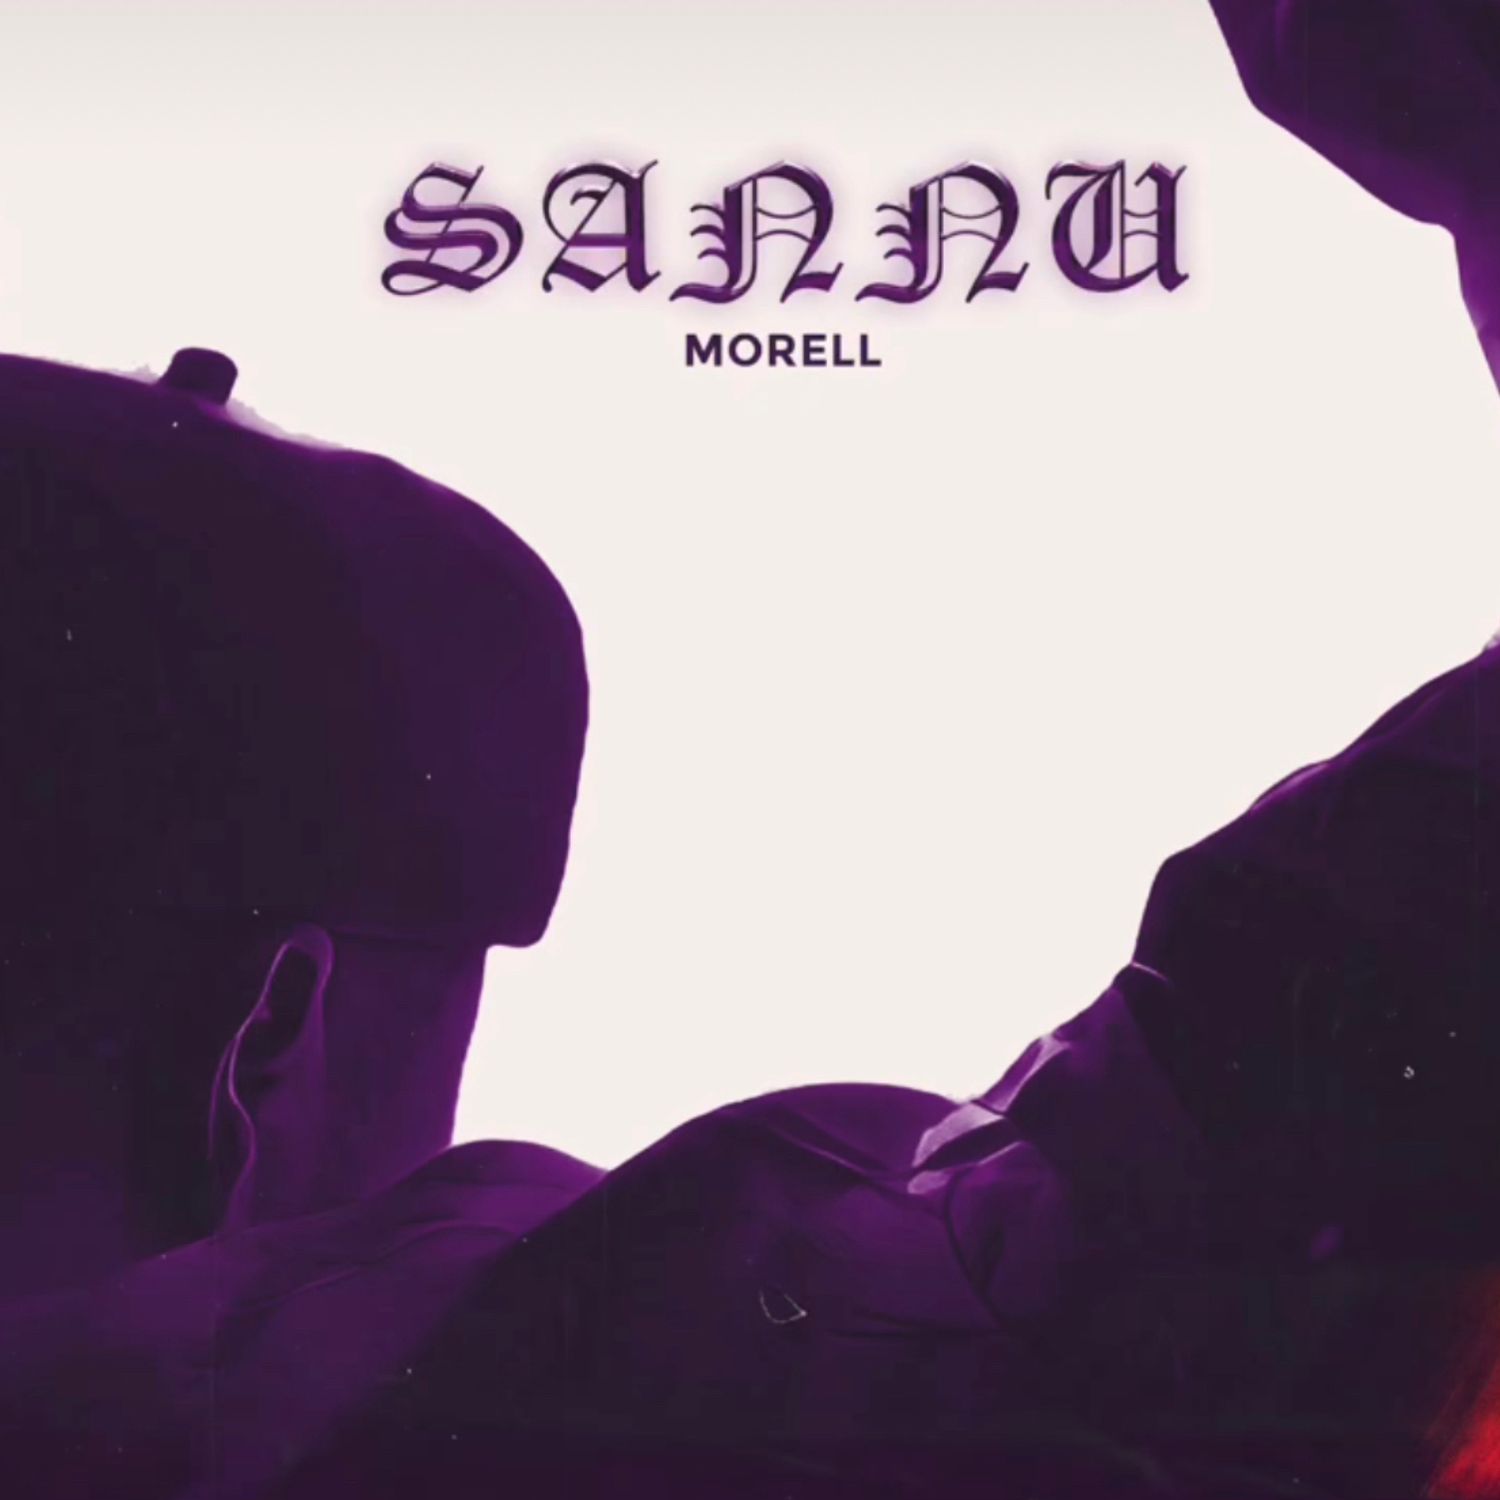 Morell - Sannu Mp3 Download